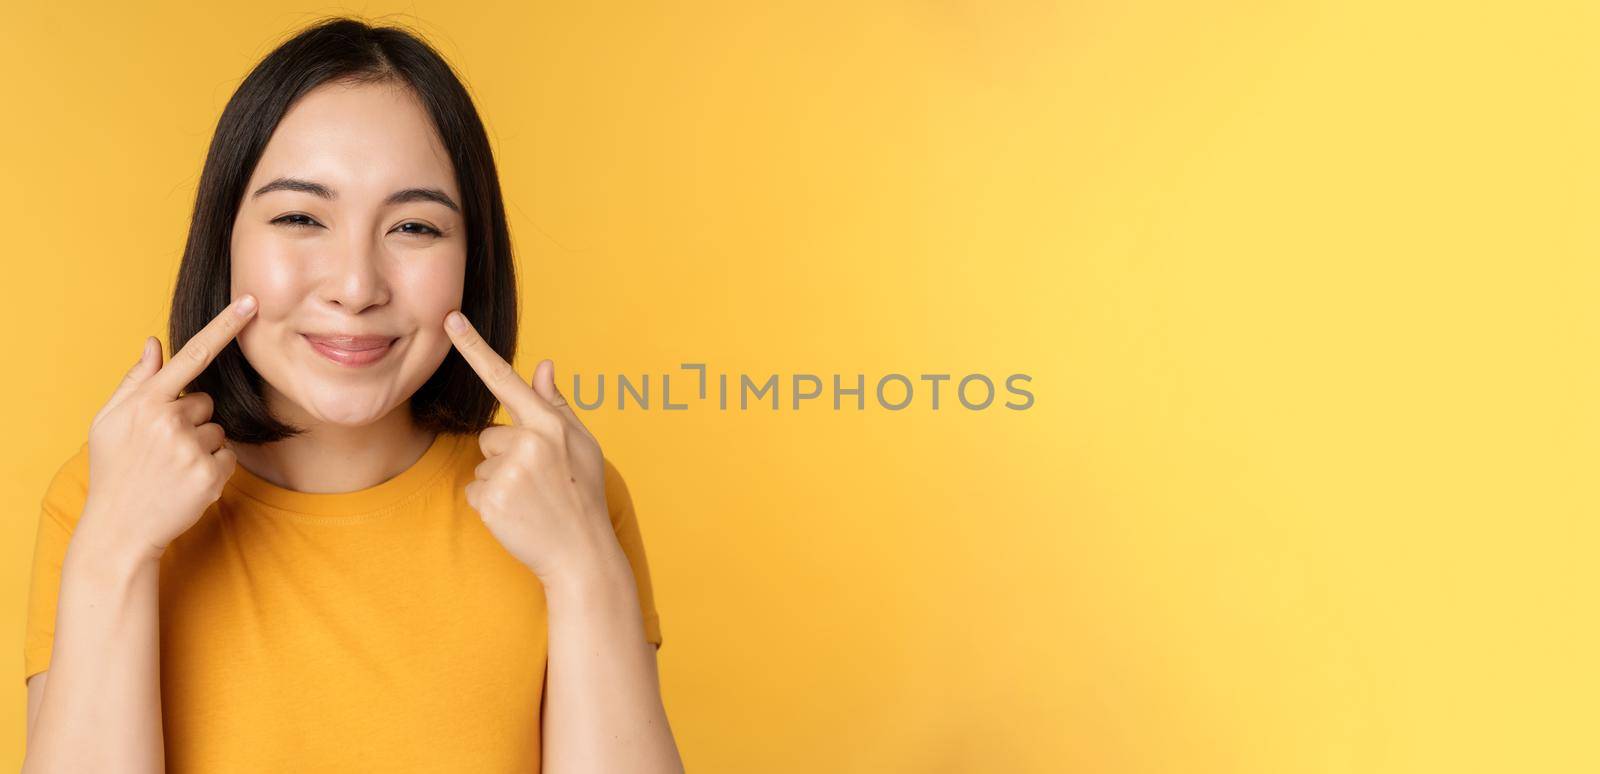 Close up portrait of cute asian girl showing her dimples and smiling coquettish at camera, standing over yellow background. Copy space